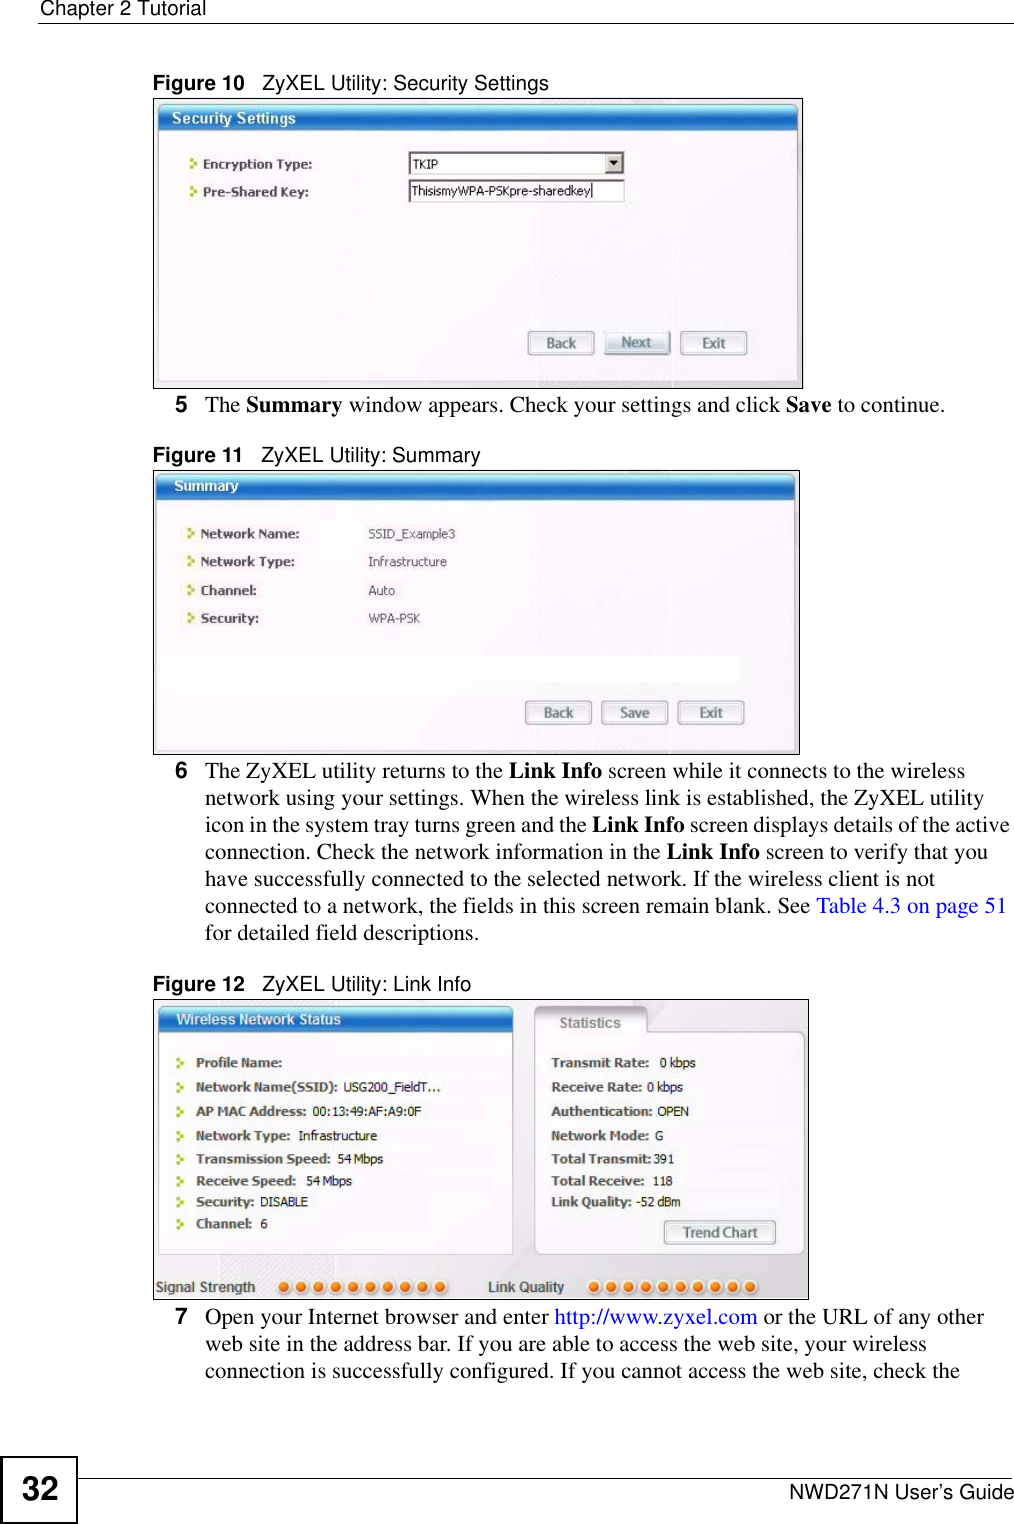 Chapter 2 TutorialNWD271N User’s Guide32Figure 10   ZyXEL Utility: Security Settings 5The Summary window appears. Check your settings and click Save to continue.Figure 11   ZyXEL Utility: Summary6The ZyXEL utility returns to the Link Info screen while it connects to the wireless network using your settings. When the wireless link is established, the ZyXEL utility icon in the system tray turns green and the Link Info screen displays details of the active connection. Check the network information in the Link Info screen to verify that you have successfully connected to the selected network. If the wireless client is not connected to a network, the fields in this screen remain blank. See Table 4.3 on page 51 for detailed field descriptions.Figure 12   ZyXEL Utility: Link Info 7Open your Internet browser and enter http://www.zyxel.com or the URL of any other web site in the address bar. If you are able to access the web site, your wireless connection is successfully configured. If you cannot access the web site, check the 